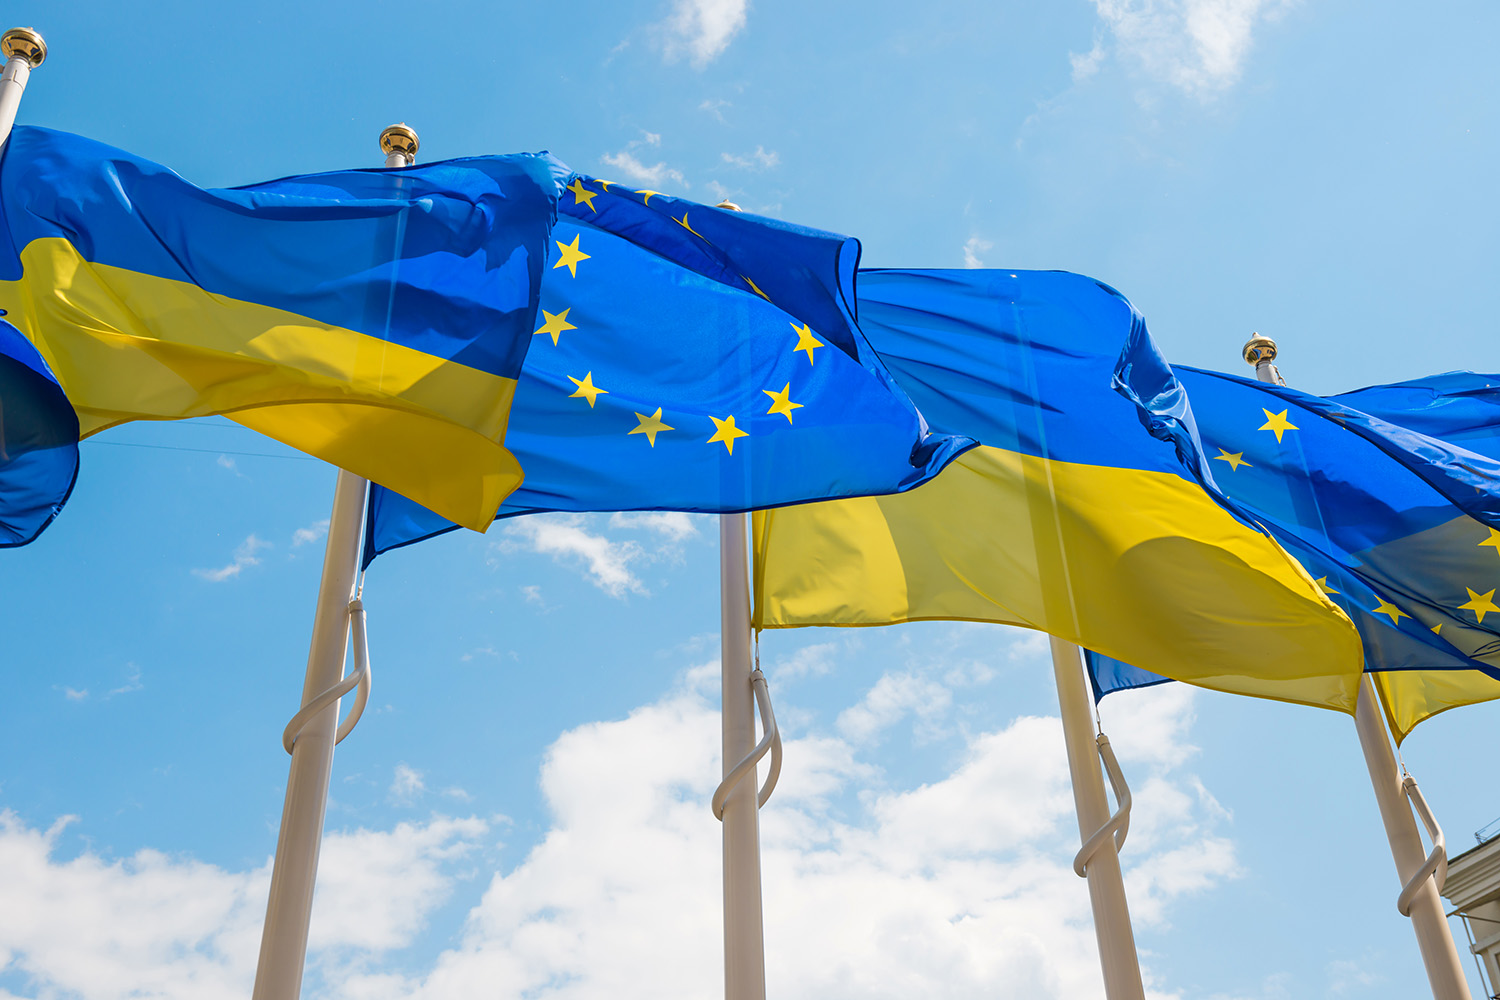 Ukraine’s EU accession process in the field of regional and local development – MinRestoration at the helm